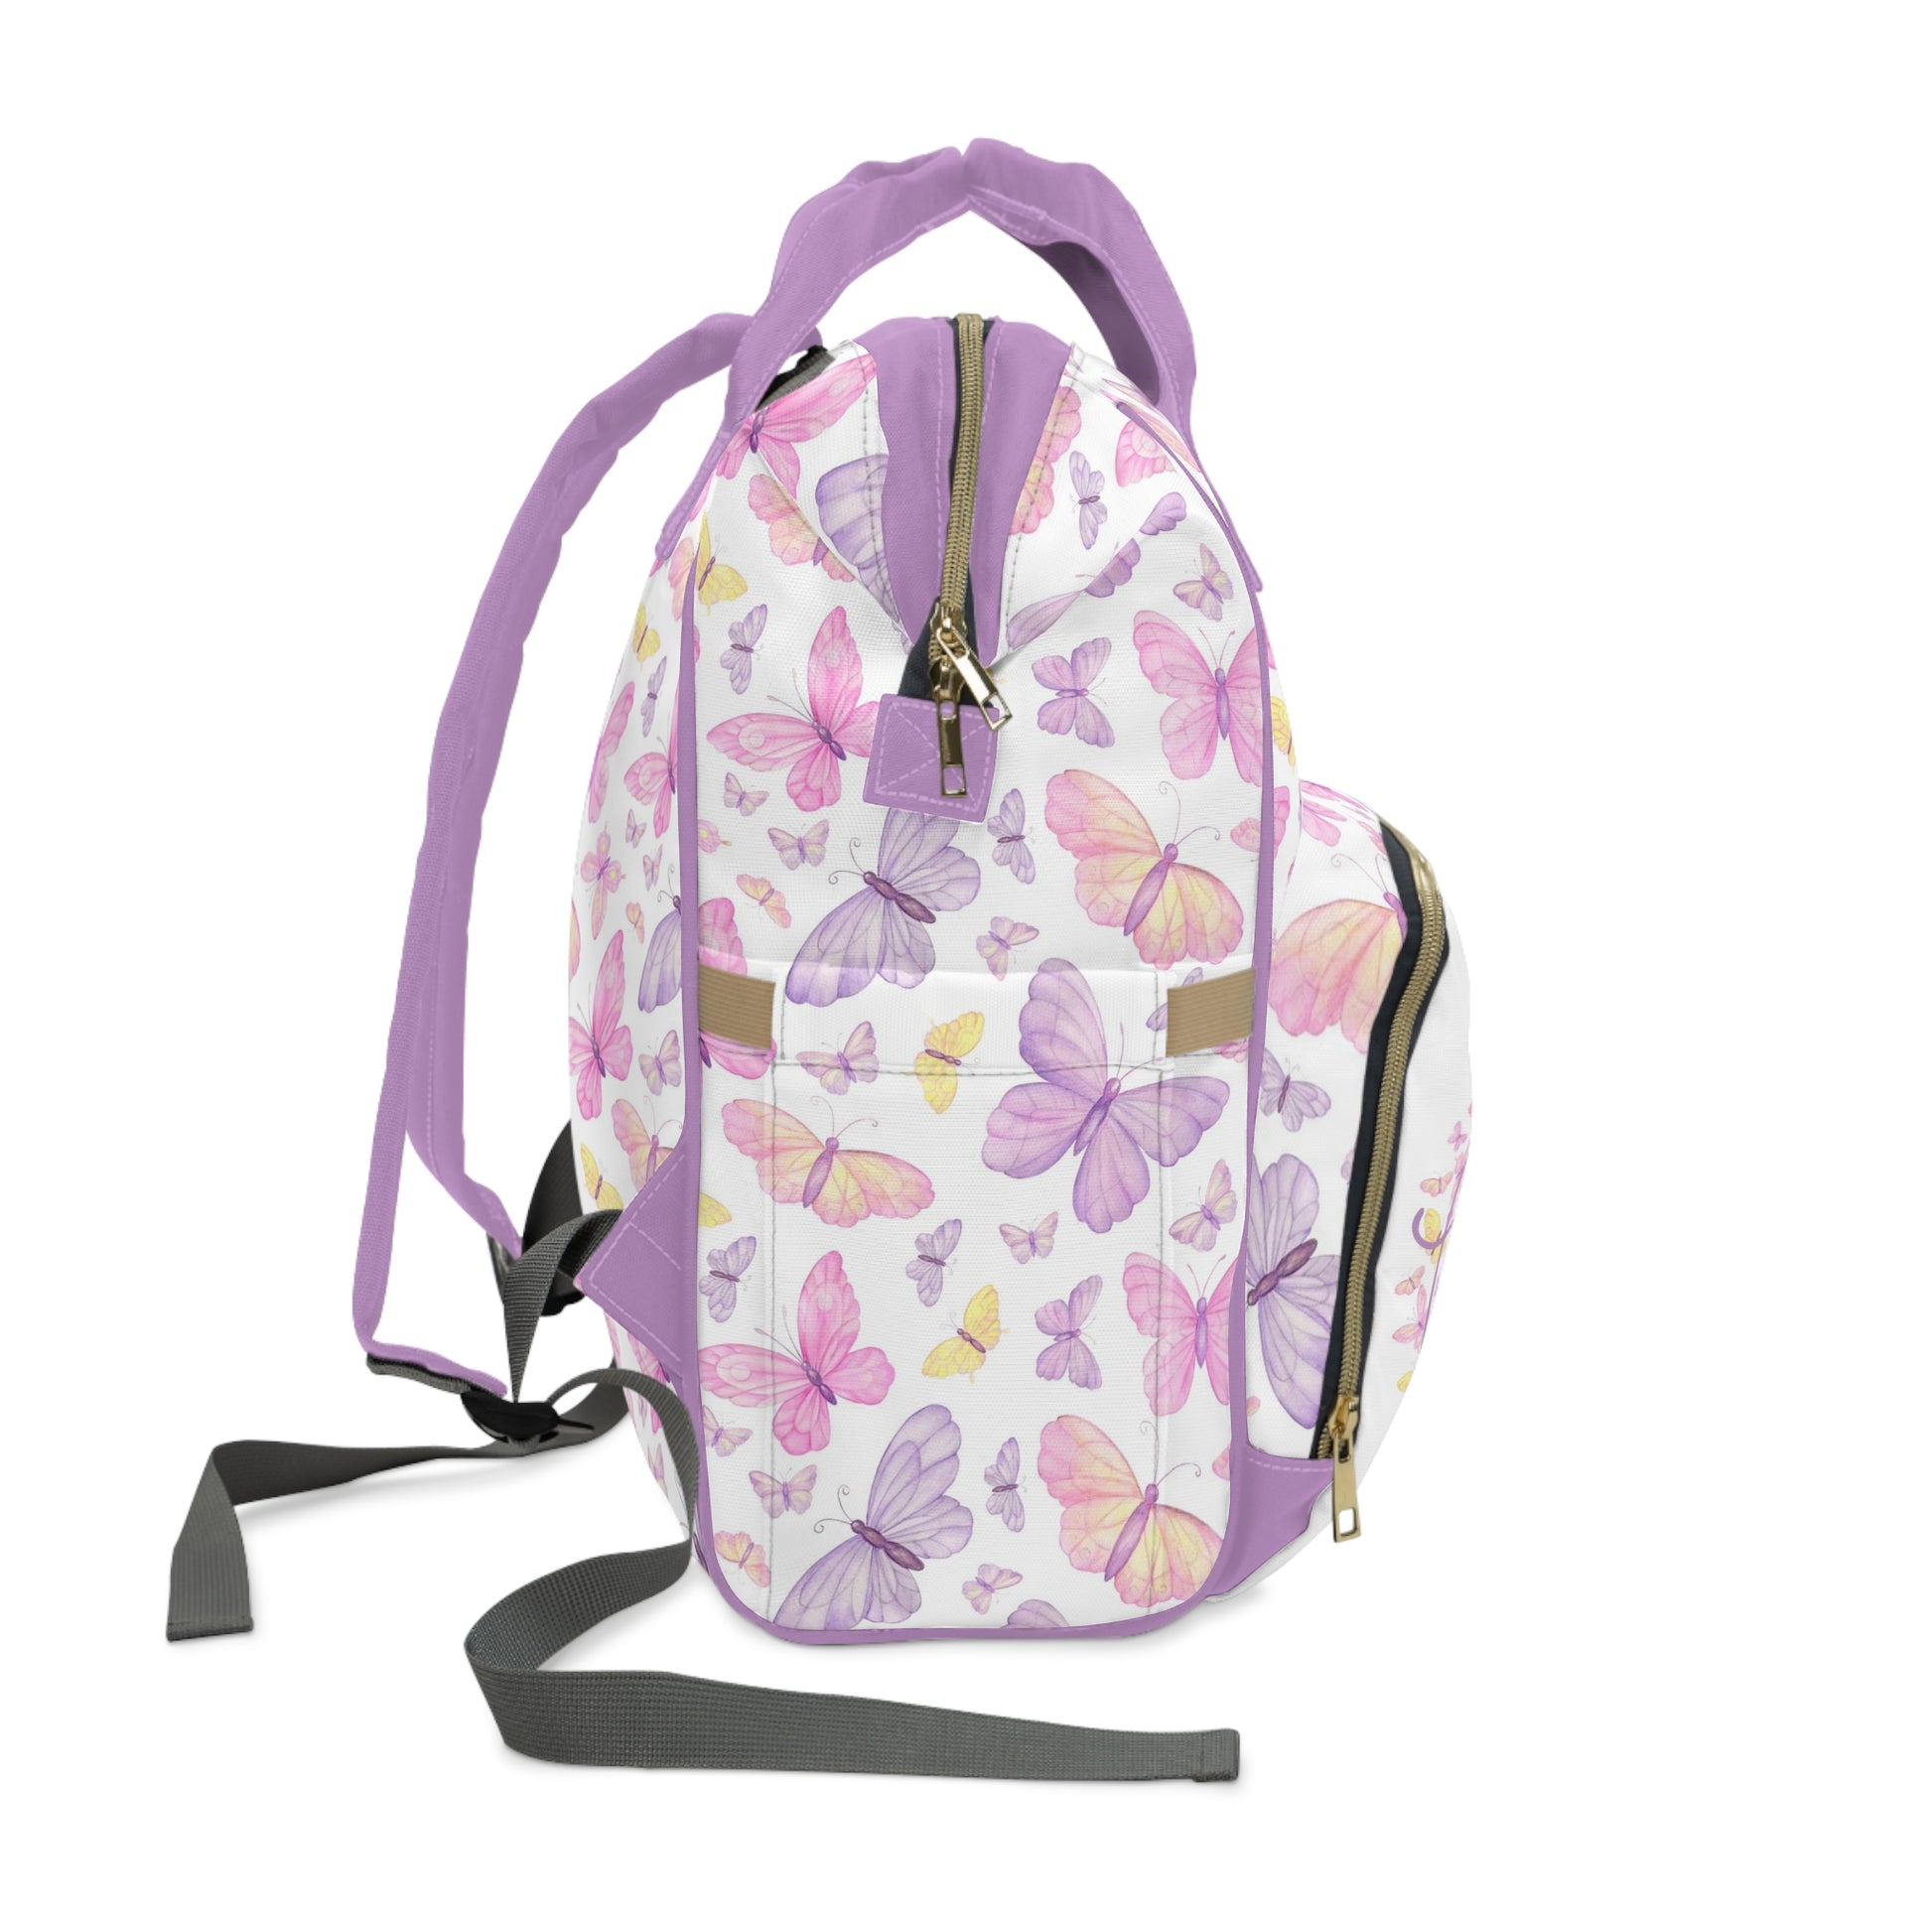 Pink Butterfly Personalized Multi-Function Diaper Bag – For My Precious Baby